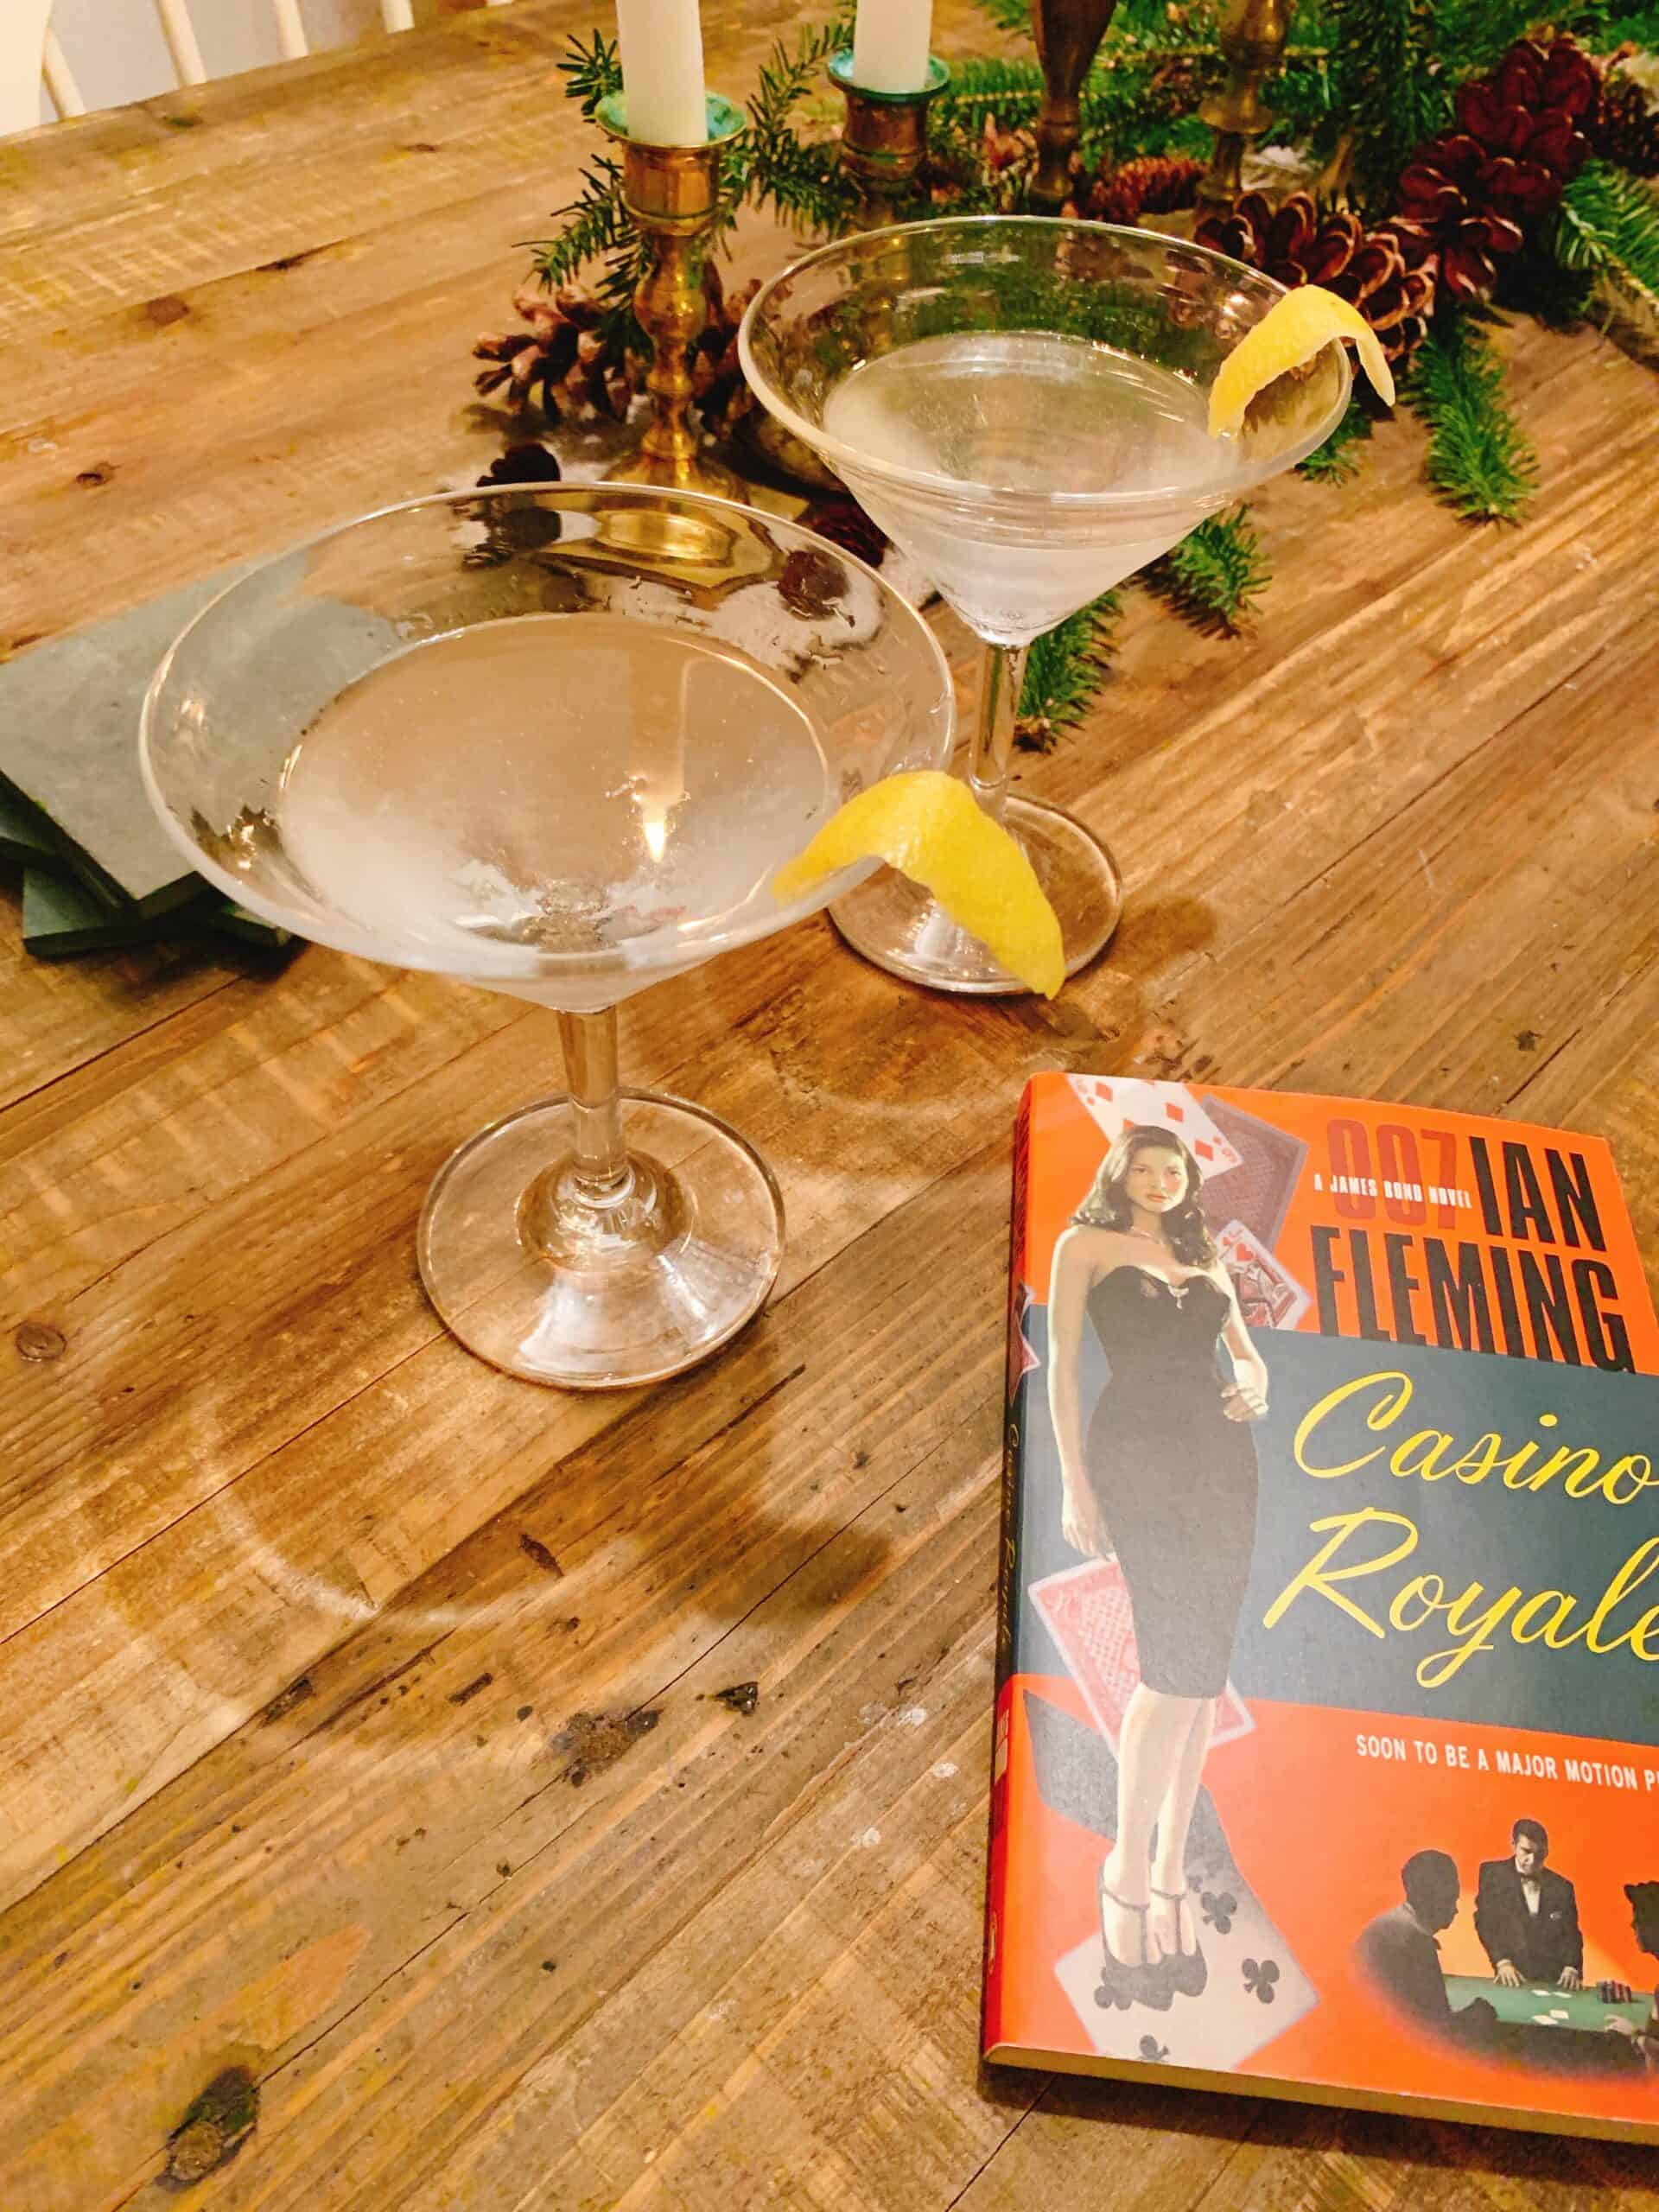 Article: What Cologne Does James Bond Wear? Image shows a copy of Casino Royale on a wooden table next to two Vesper cocktails